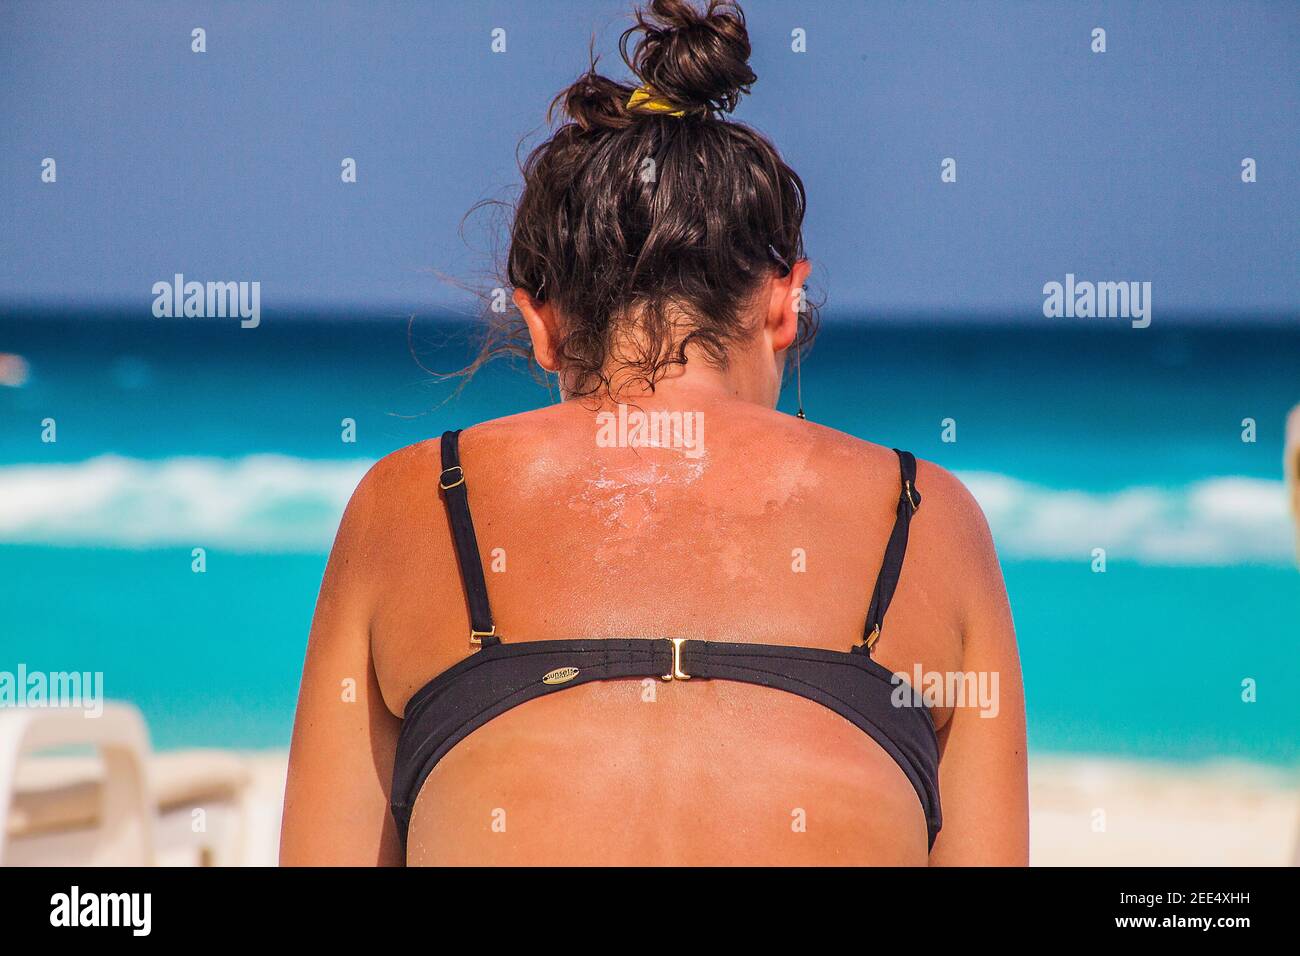 woman with sunburnt back Stock Photo